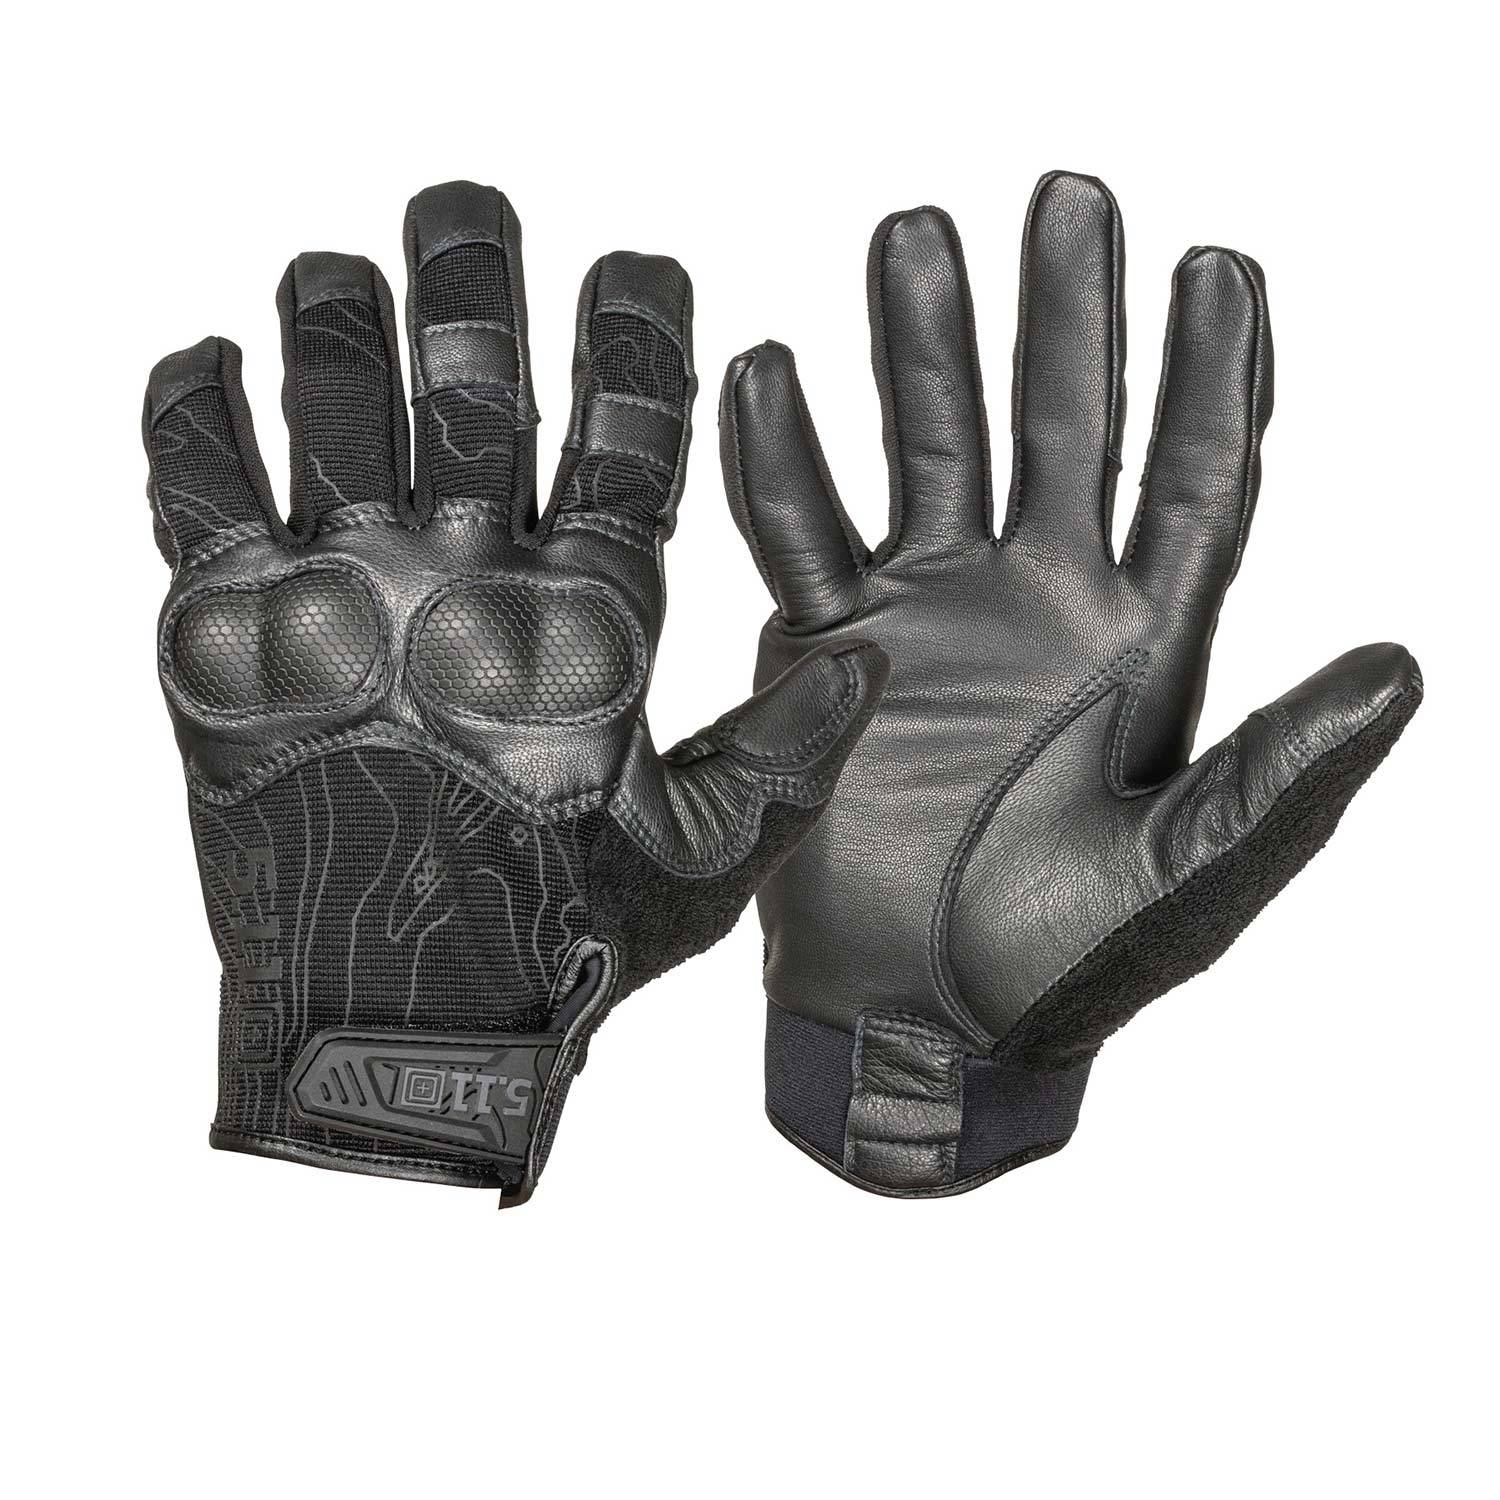 5.11 TACTICAL HARD TIMES 2 GLOVES